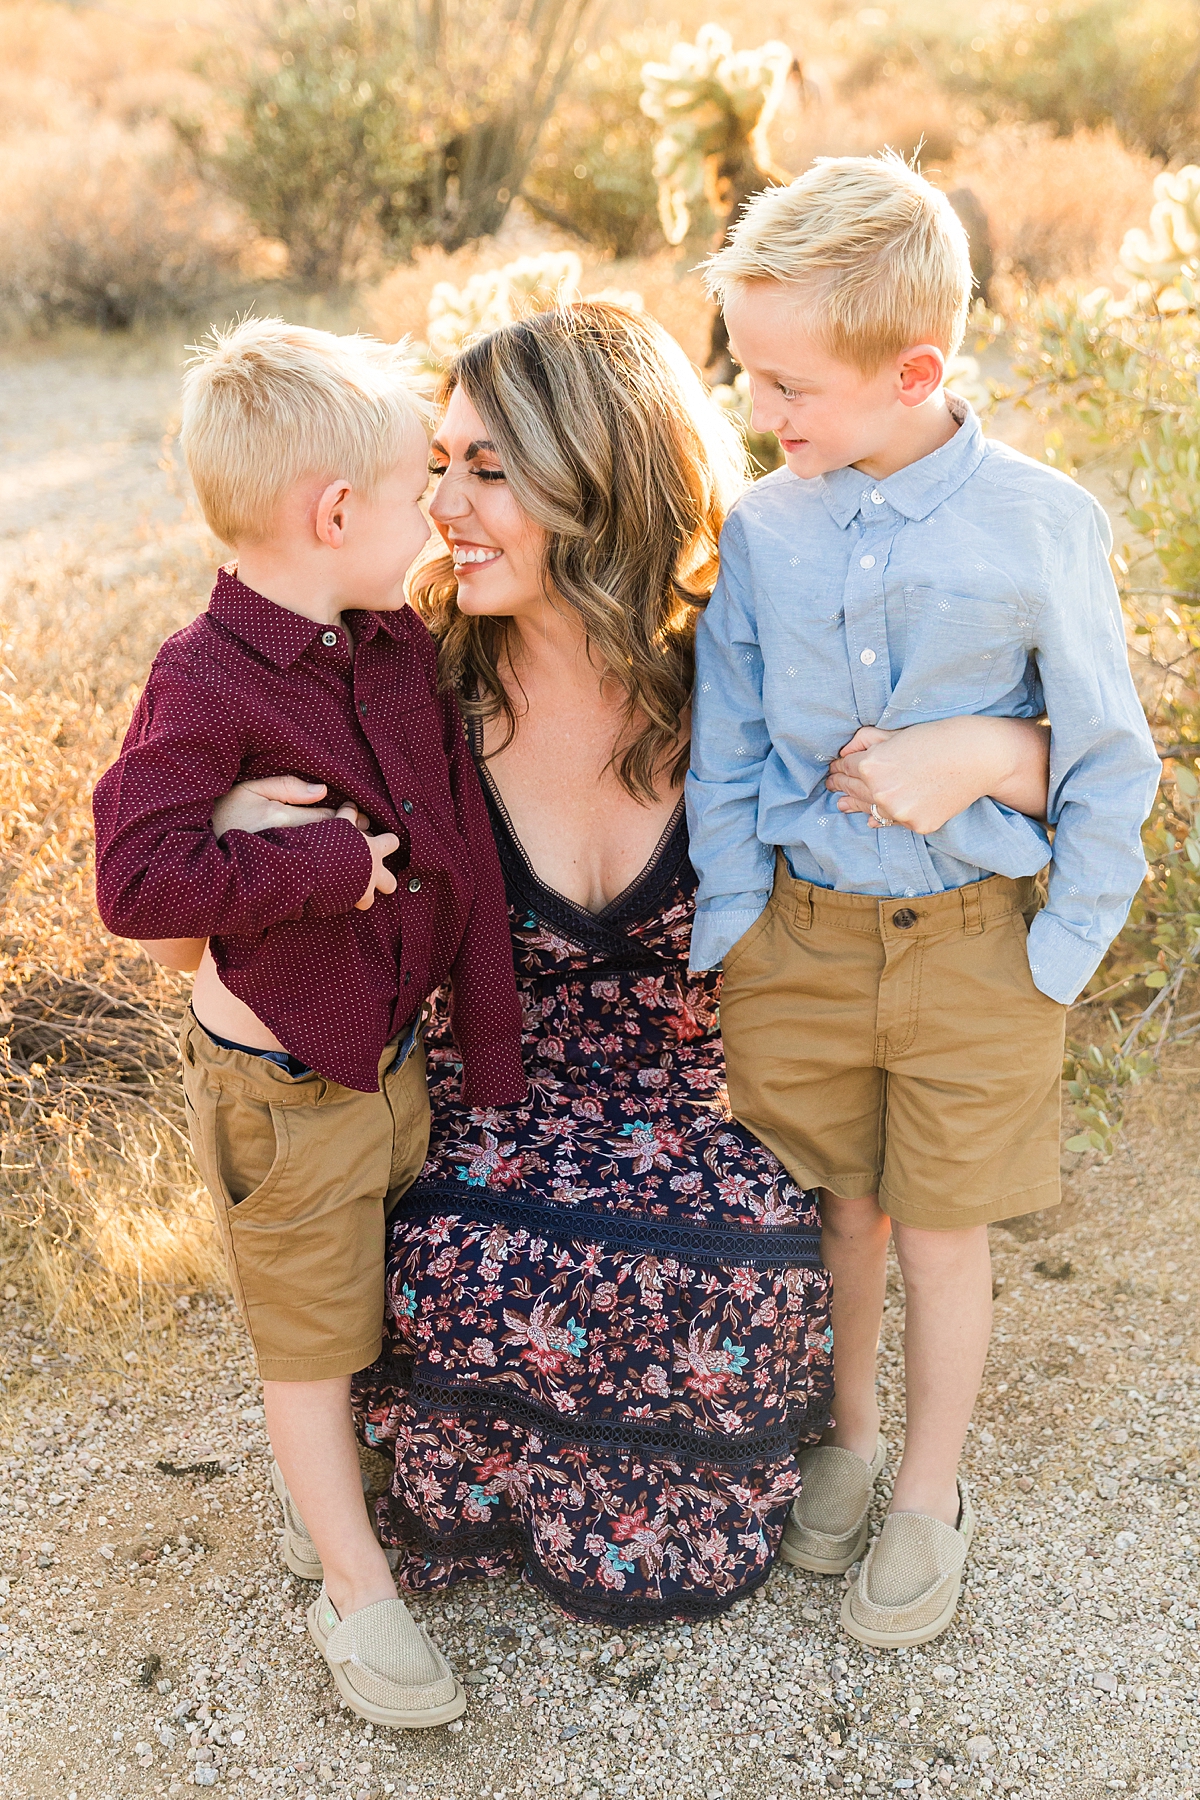 Leah Hope Photography | Scottsdale Arizona Family Photographer | Phoenix Arizona Family Pictures | Desert Landscape Cactus Mountains Scenery | Sunset Natural Light | How to Pose | Family Poses | Family Photos | Family Posing Ideas | Golden Hour Sunlight